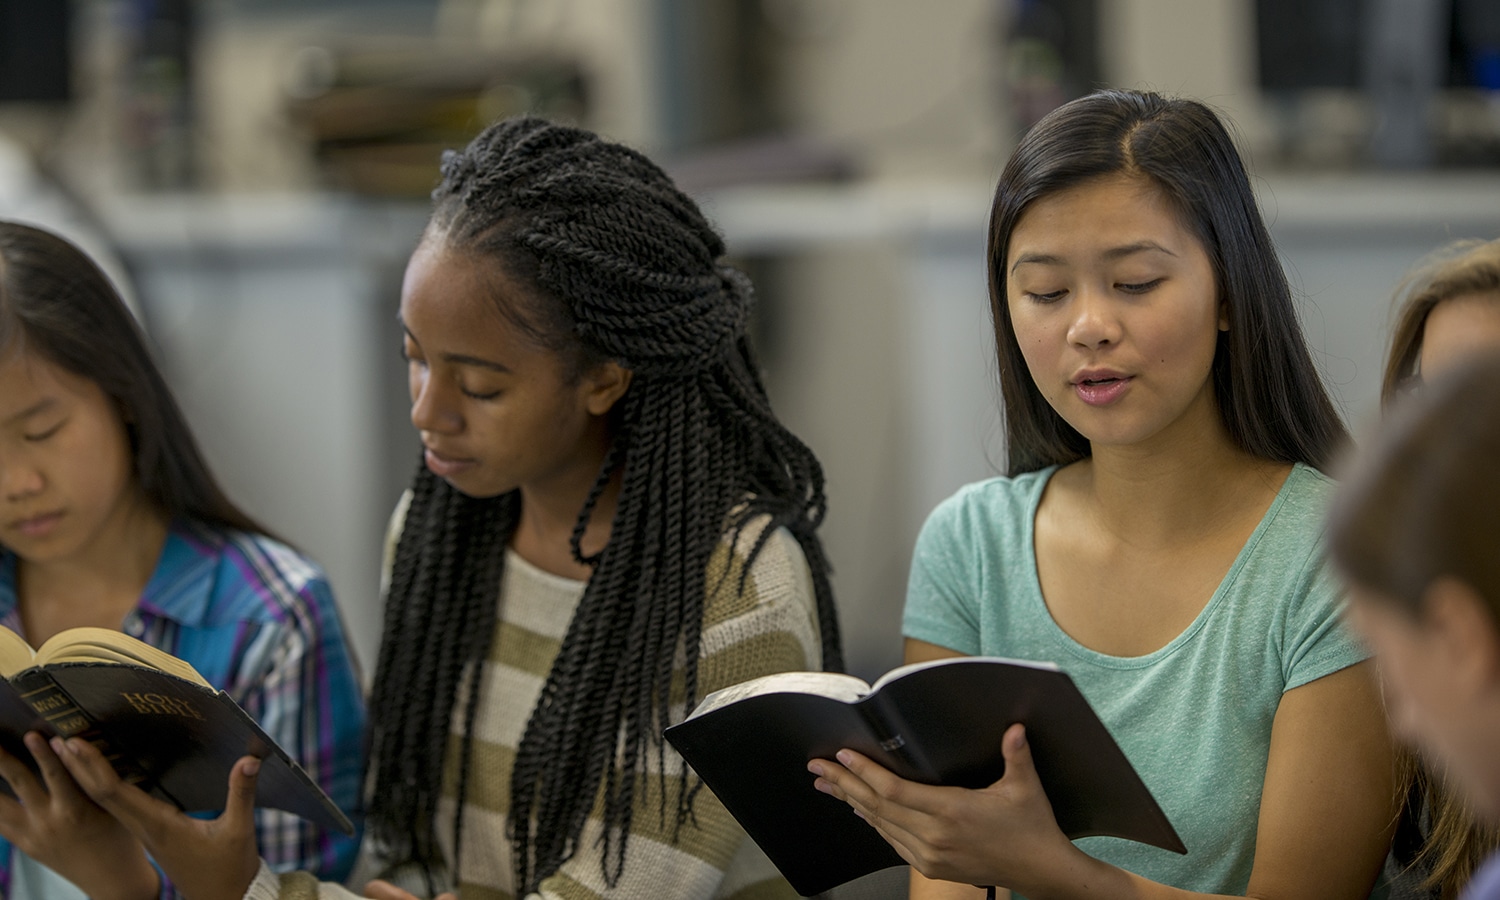 | A multi-ethnic group of high school age students are sitting together reading the Bible together during a Bible study.